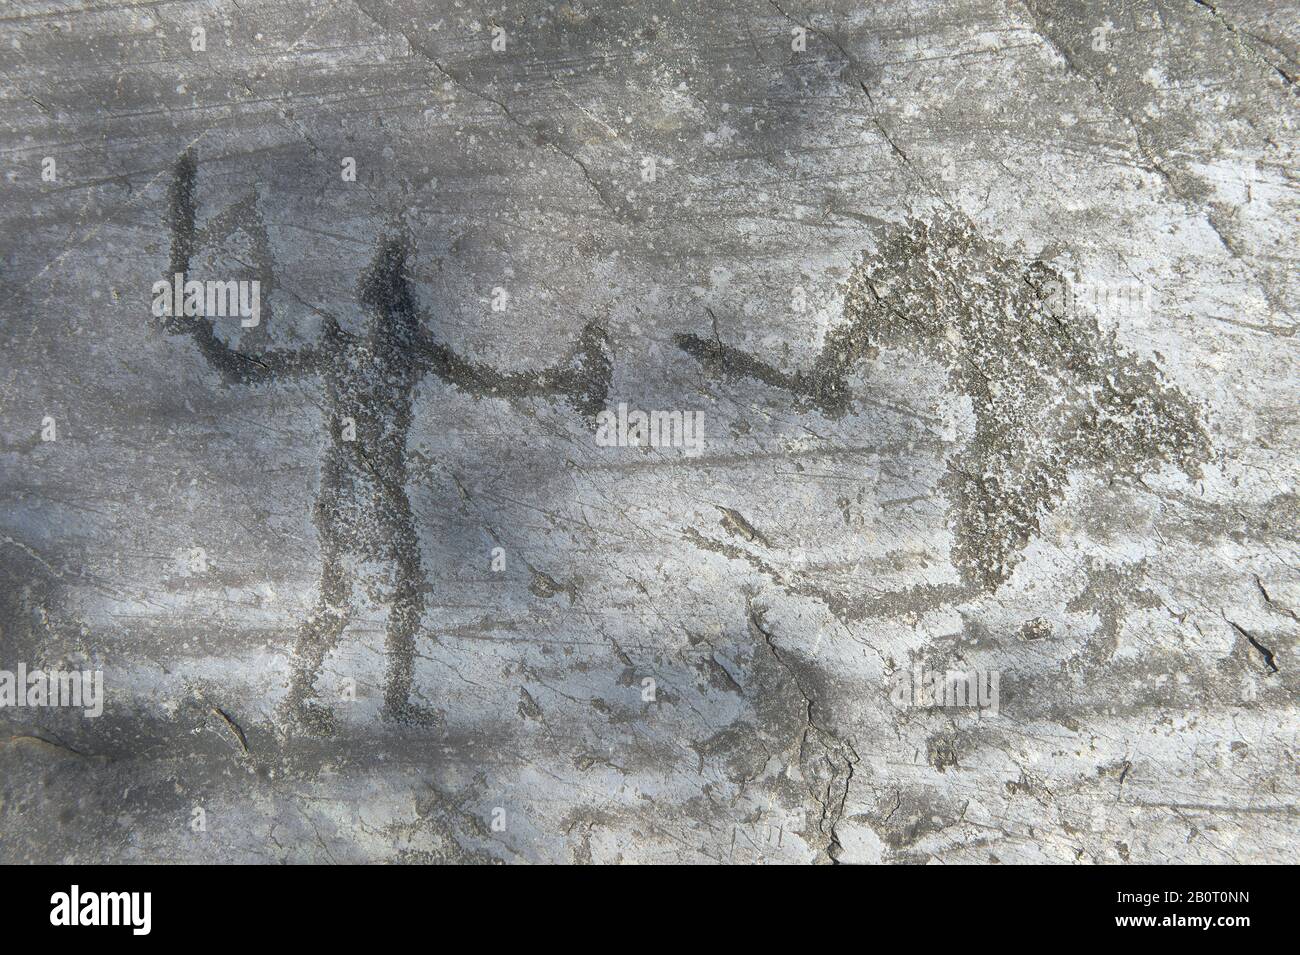 Petroglyph, rock carving, of two feet outlines. Carved by the ancient Camunni people in the iron age between 1000-1600 BC. Rock no 24,  Foppi di Nadro Stock Photo